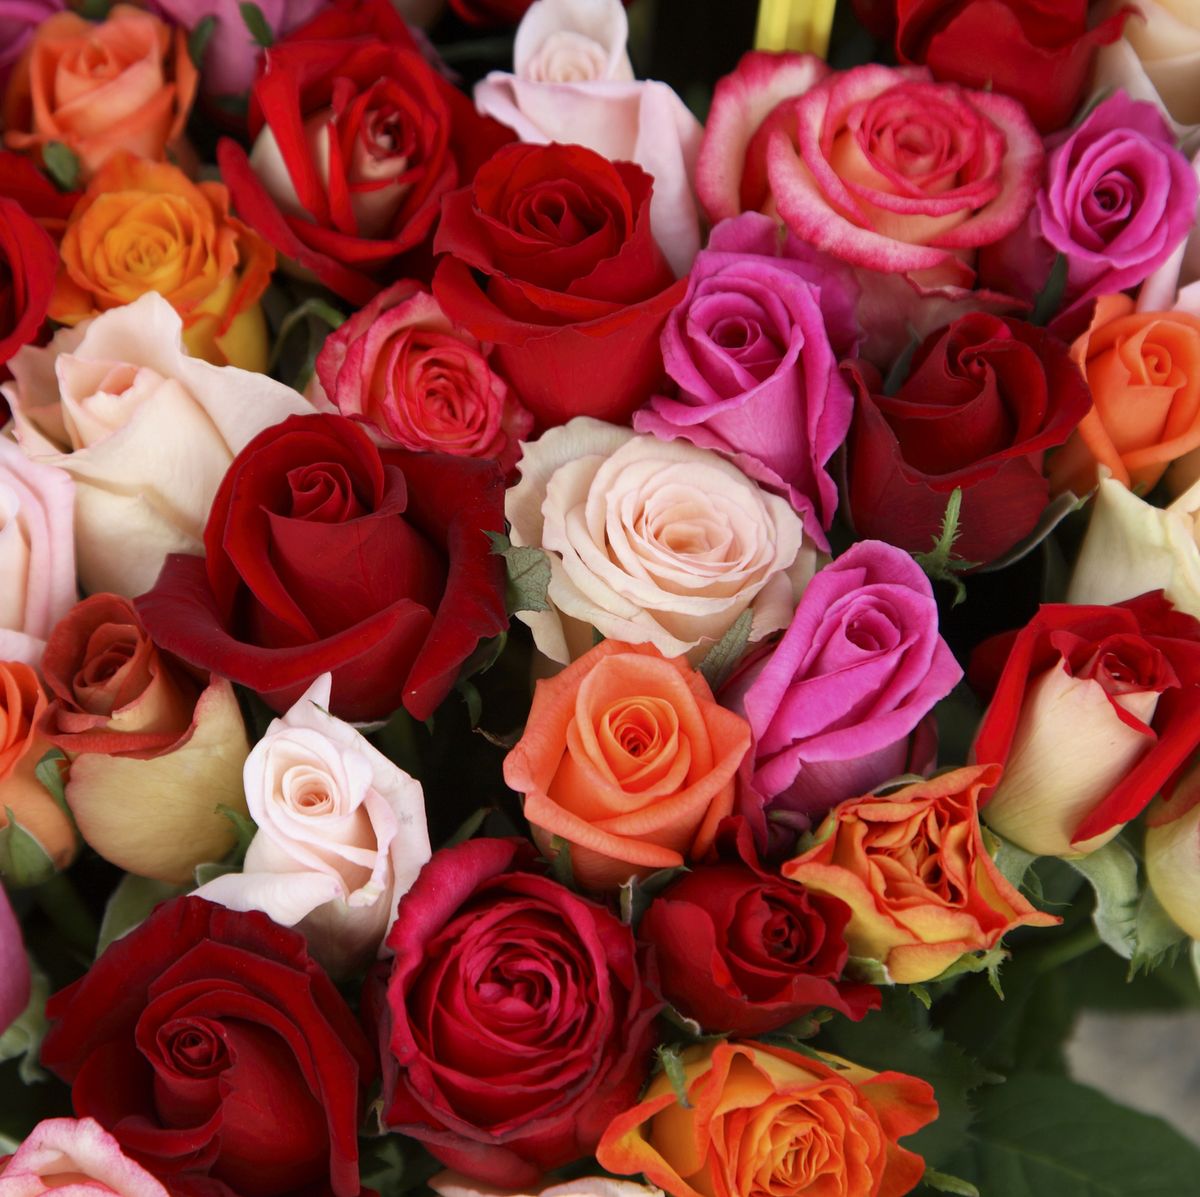 Different shapes and colors of roses.